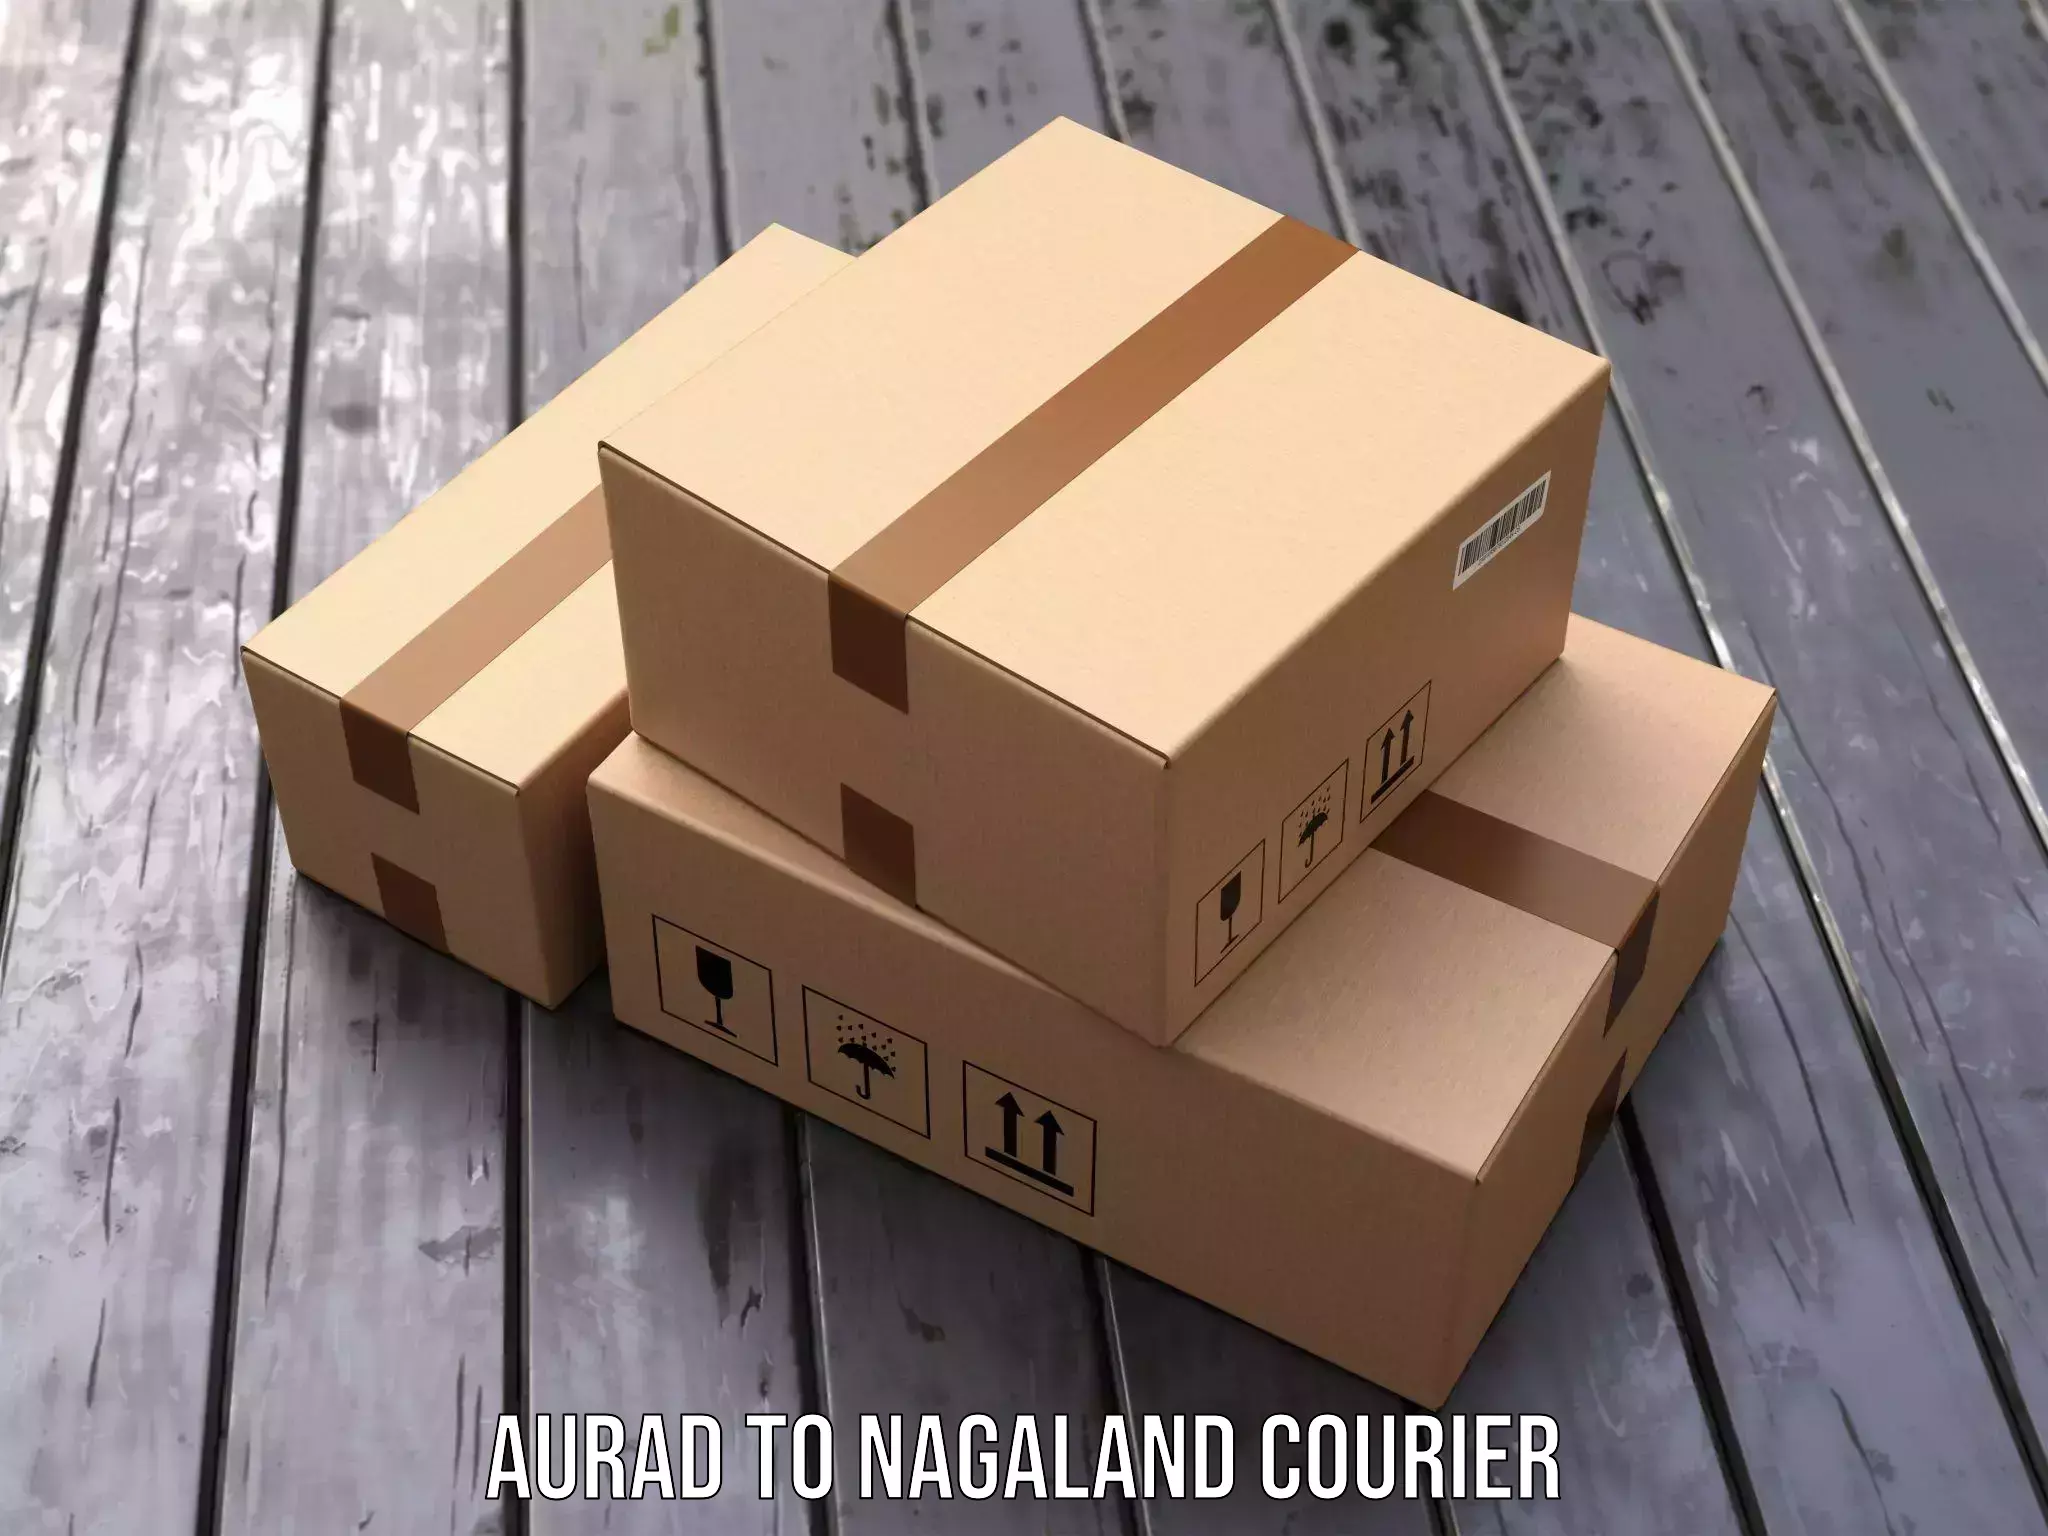 Subscription-based courier Aurad to Nagaland